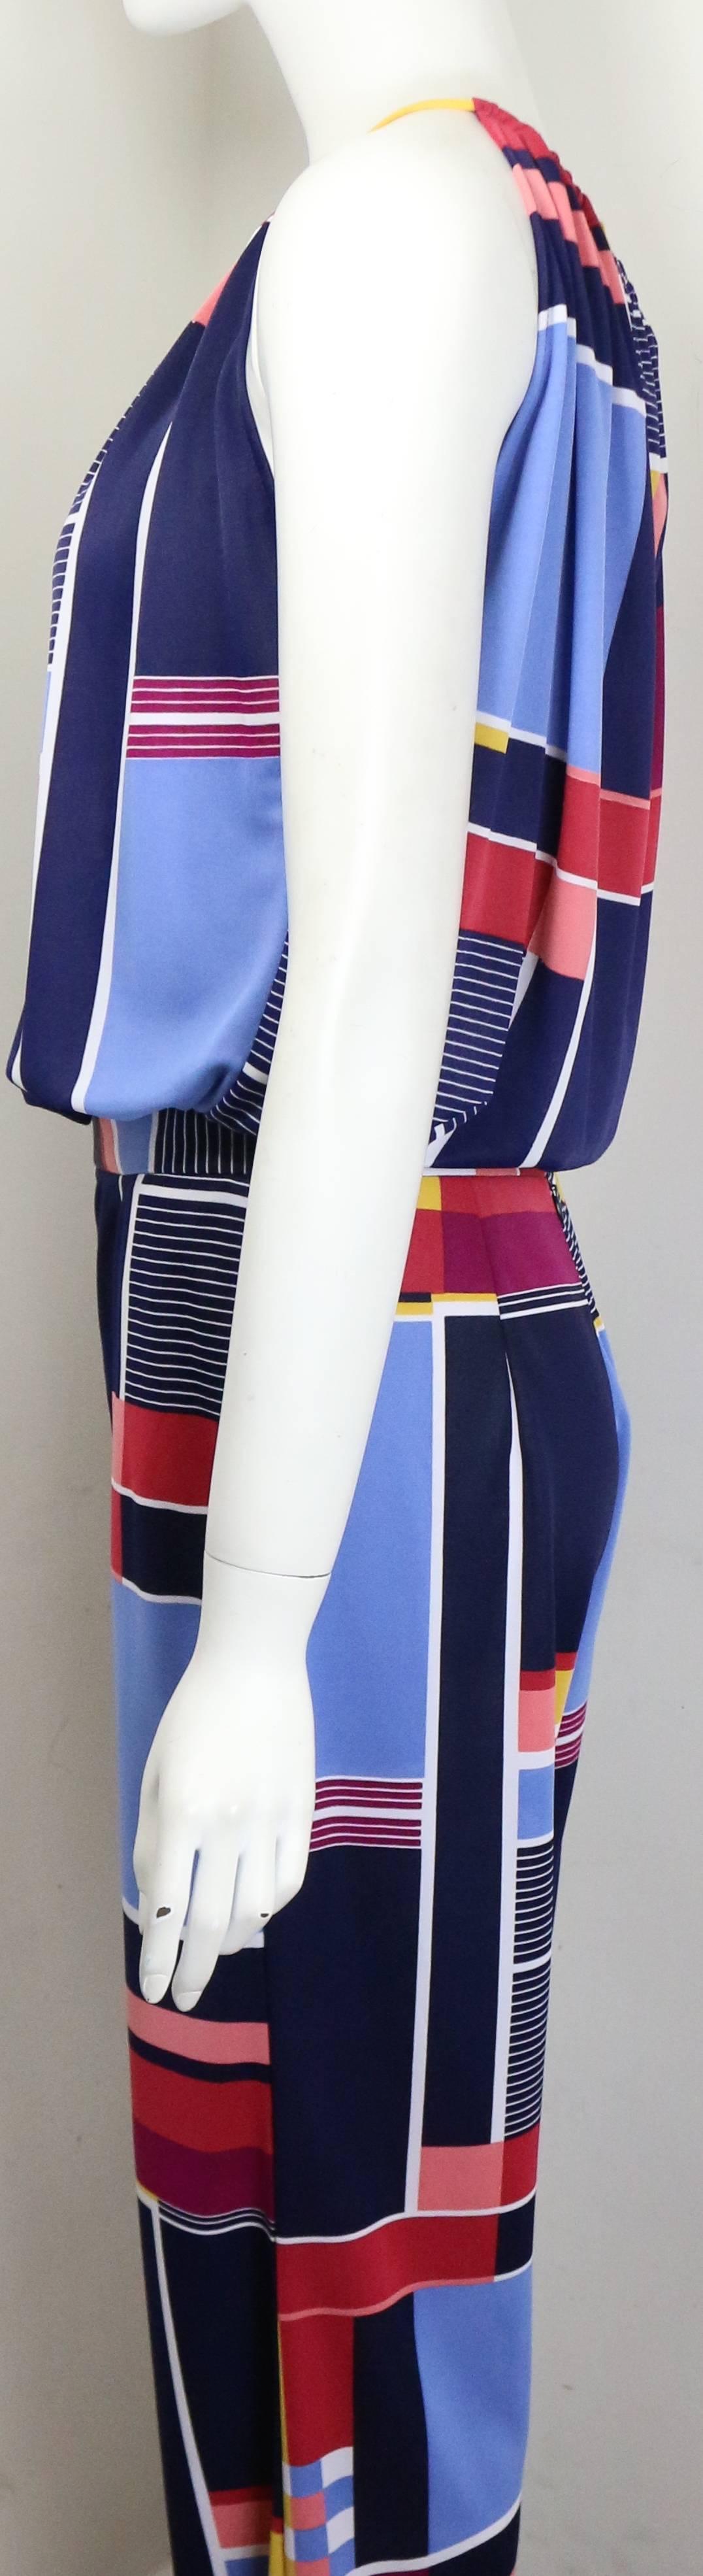 Clements Ribeiro Multi Colour Retro Patterns Blouse and Pants Ensemble  In Excellent Condition For Sale In Sheung Wan, HK